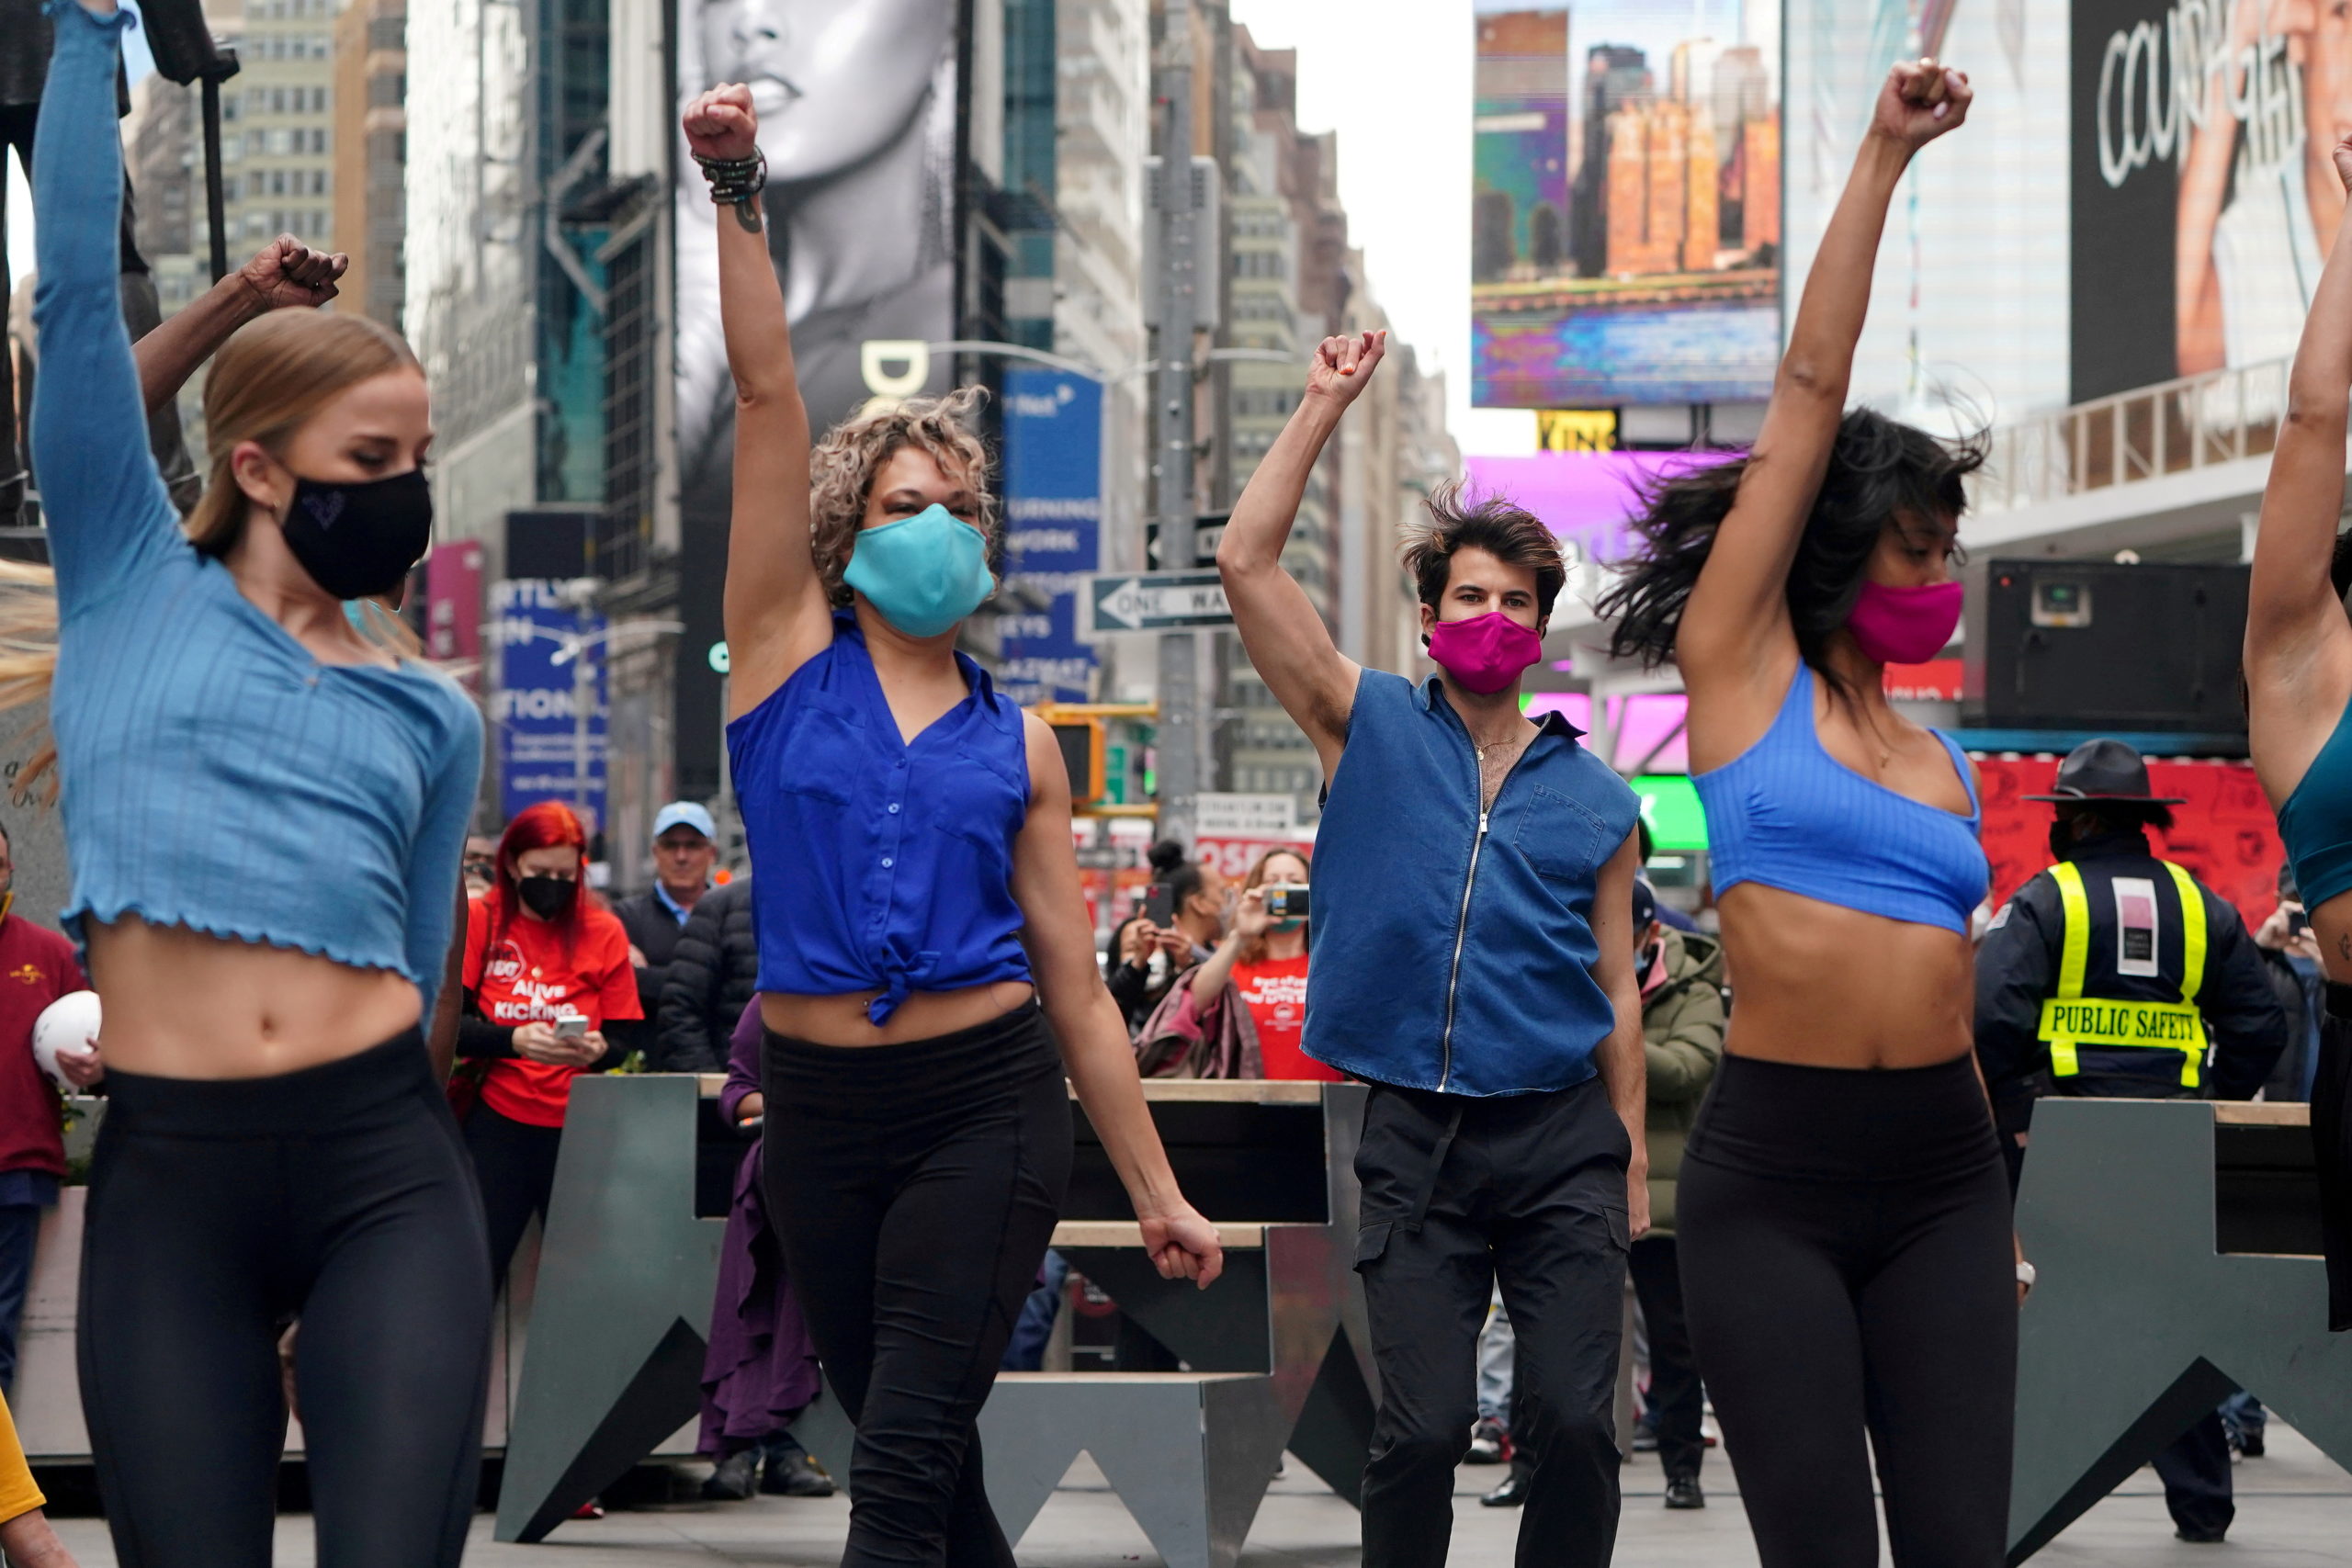 Performers take part in a pop up Broadway performance in anticipation of Broadway reopening in Times Square amid the coronavirus disease (COVID-19) pandemic in the Manhattan borough of New York City.